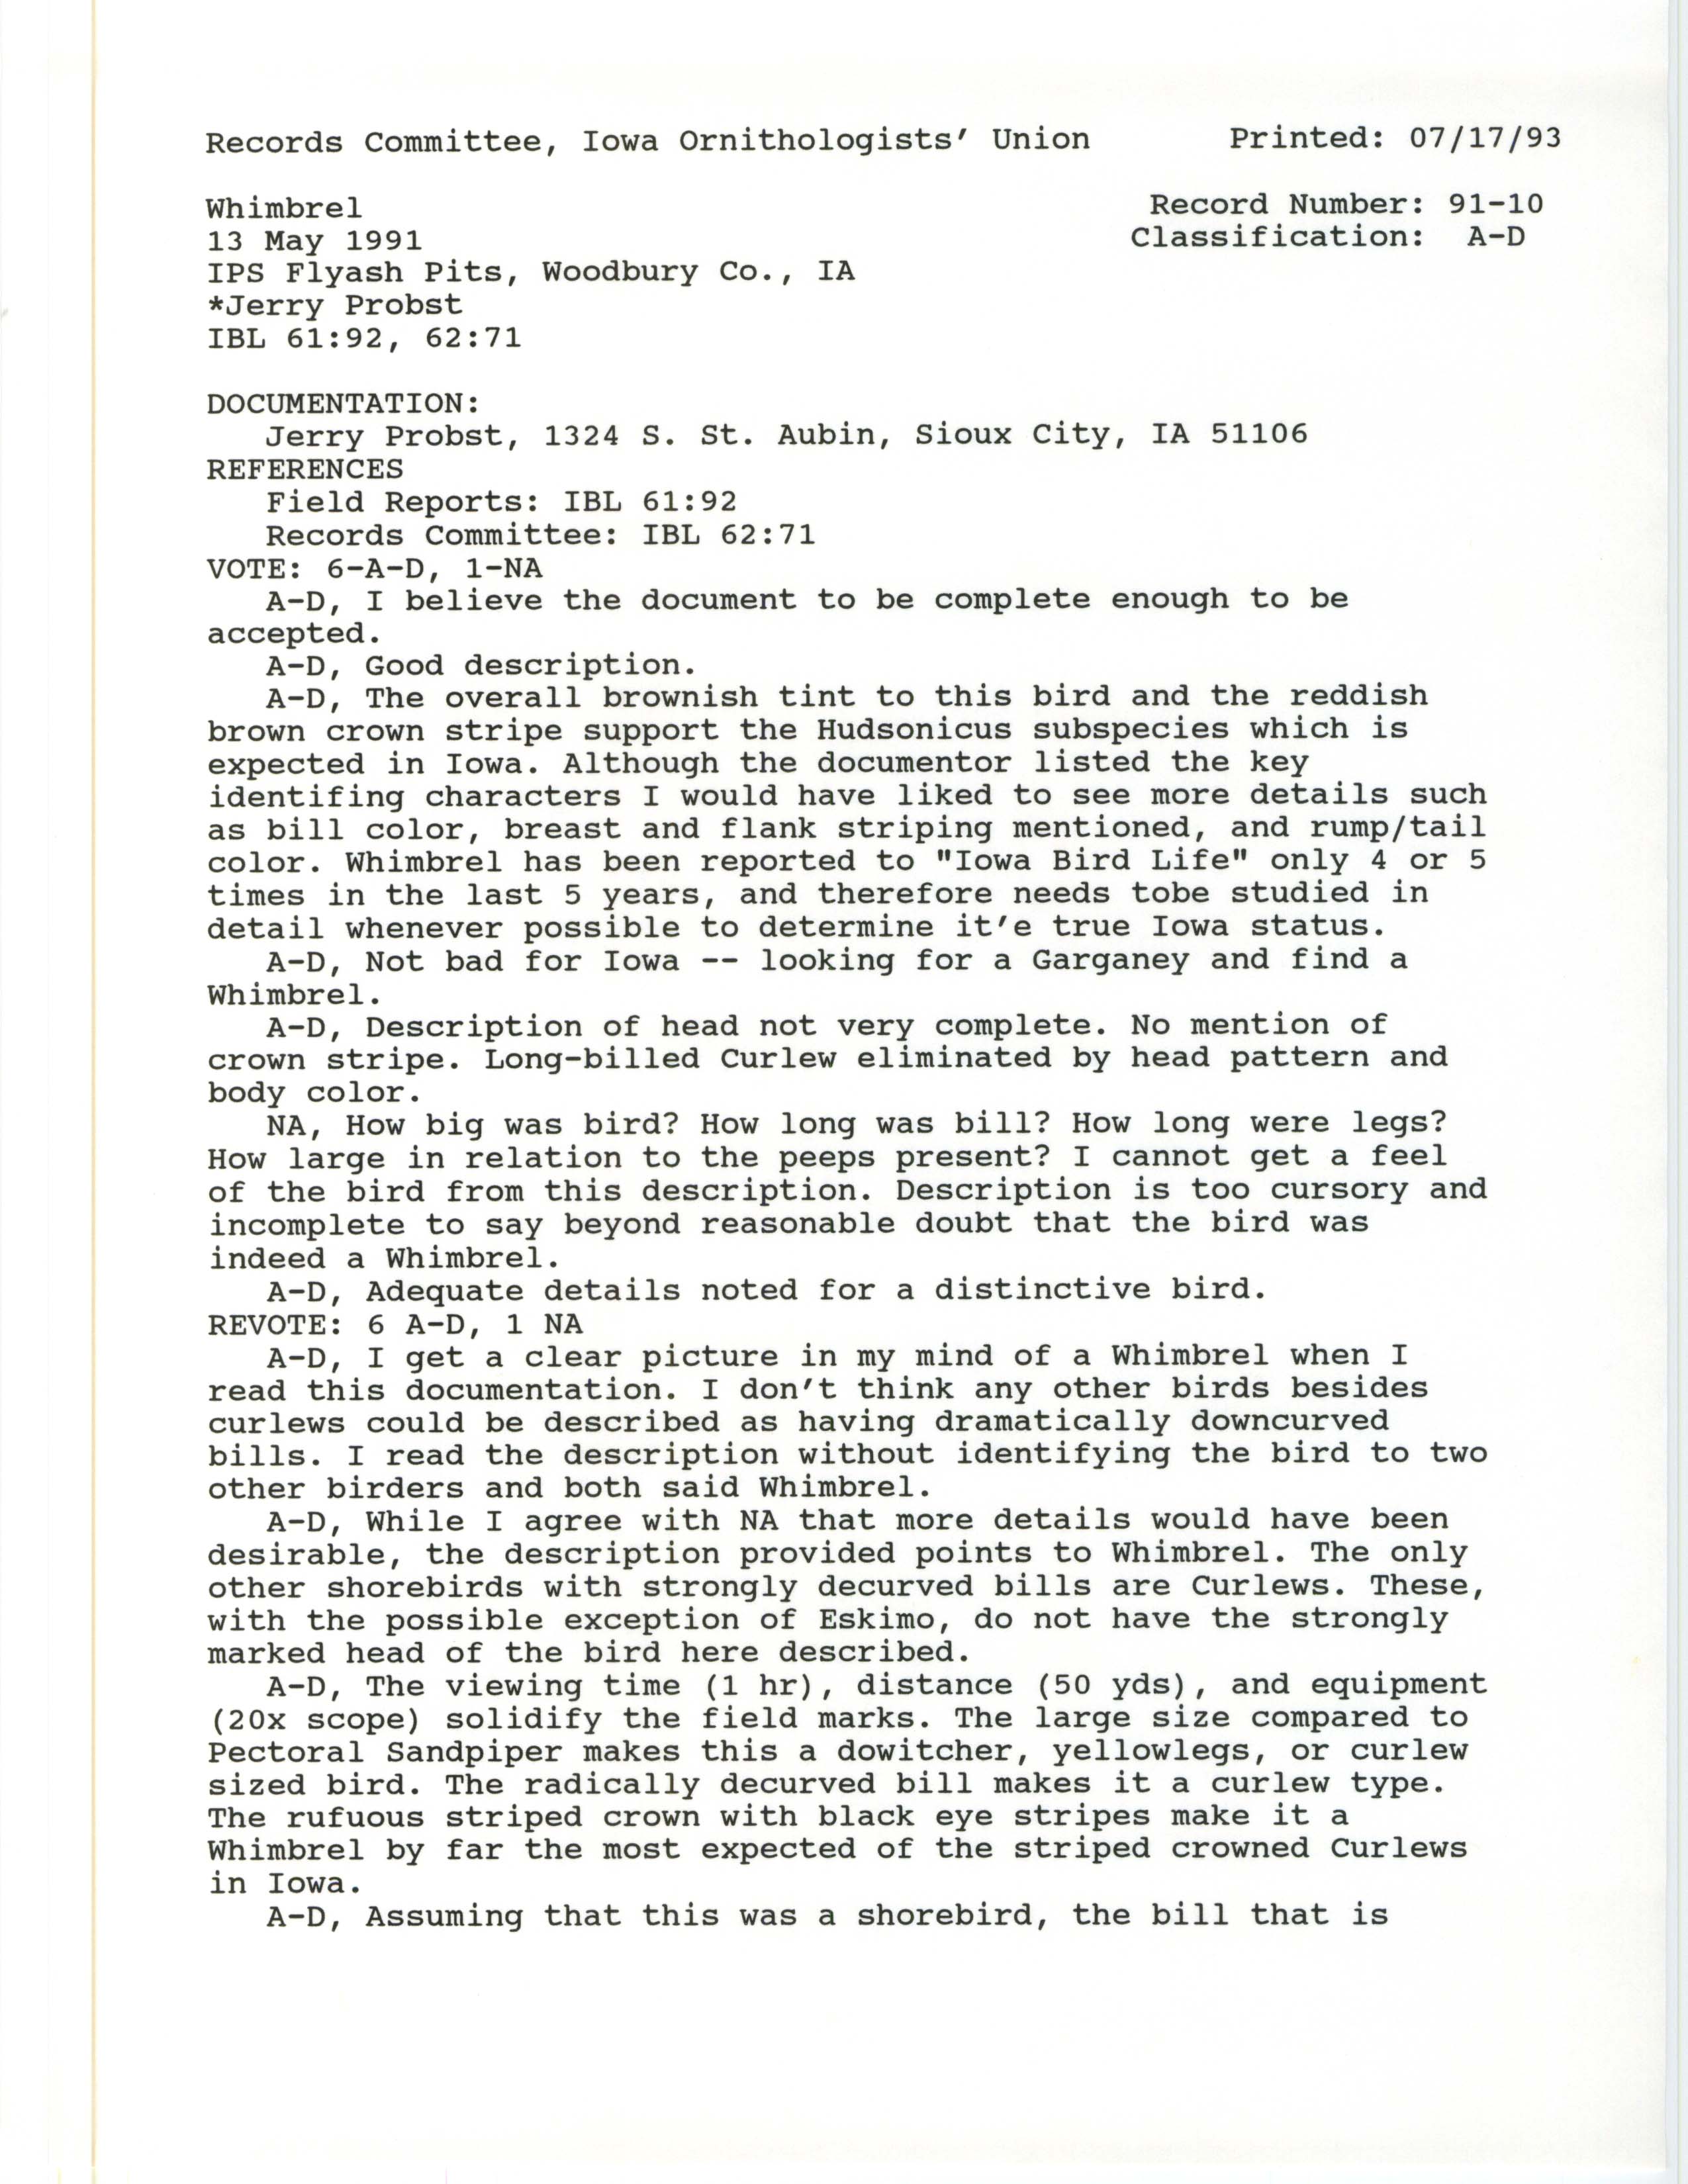 Records Committee review for rare bird sighting of Whimbrel at MidAmerican Energy Ponds in Woodbury County, 1991